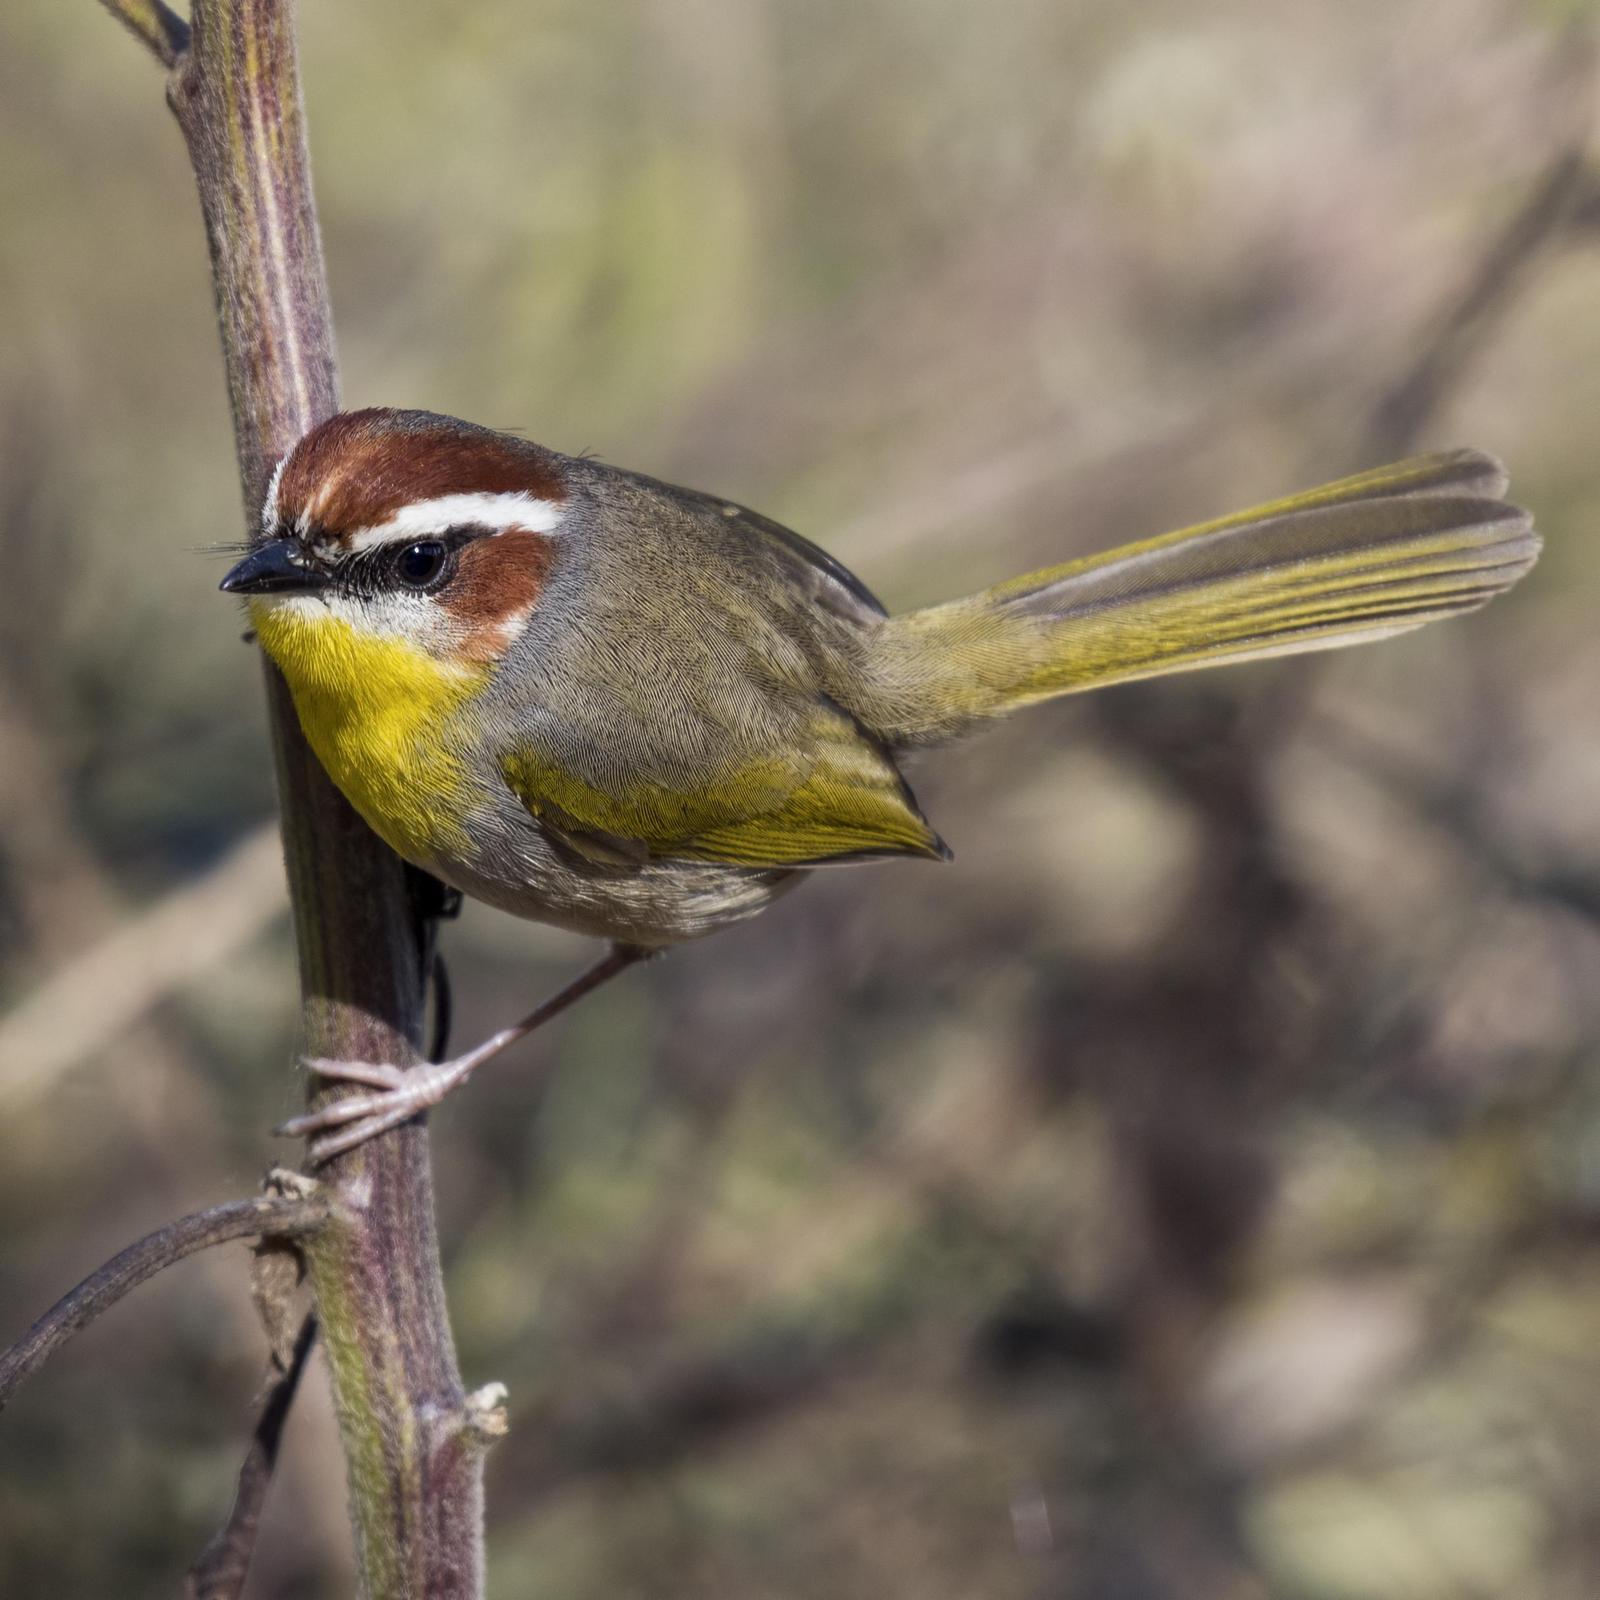 Rufous-capped Warbler Photo by Rolando Barrera